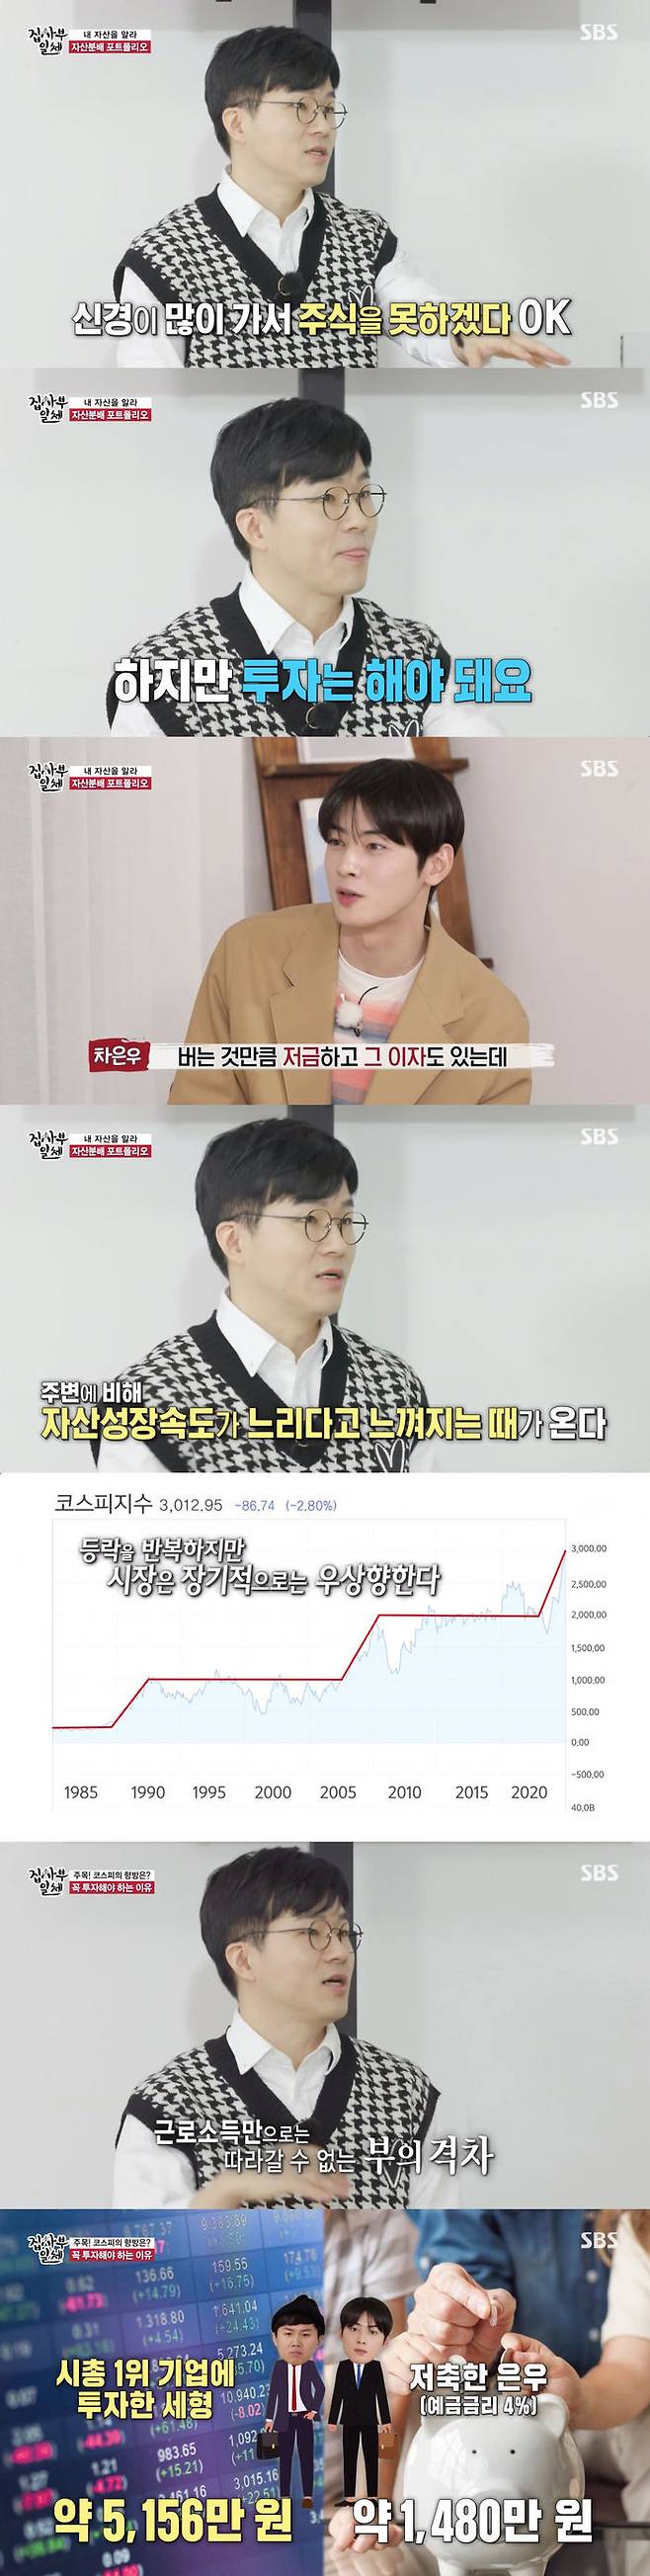 Shuka reveals why he should do InvestmentOn SBS All The Butlers broadcast on the 28th, economic mentor Shuka appeared as master.On the day of the broadcast, Jung Eun-woo said, I am interested in stocks, but I am not confident that I will pay much attention.We do not have to do stocks, but we have to do investment, Shuka advised.Then Jung Eun-woo asked honestly, If you save as much as you buy, you will get interest there, but why should you invest in risky assets?Shuka said, I understand that thinking about it and I think it is a somewhat correct judgment.However, as time goes by, I think that my asset growth rate is slower than others. He then released the KOSPI JiSoo graph in Korea.The KOSPI JiSoo repeats the ups and downs, but the market is idolized in the long run.One day, a sudden jump year comes, Shuka said.There is a time to jump once every 20, 15 or 10 years, and if you do not do investment, you can not follow the people who do investment.There is a disparity of nonsense wealth that can not be followed by my Paycheck. This means that when two people of the same Paycheck 10 years ago were 10 million won, one was invested in the first company in the market, and one was saved, the investment was made 10 years later, which was 51.56 million won and the saving was 14.8 million won.This is why I have to study Investment, Shuka said. I roll Snowball, but when I roll Snowball, it gets bigger.If I dont roll Snowball, Ill keep my eyes on Snowball.But obviously, it should be an investment somewhere so that the eyes continue to roll. 